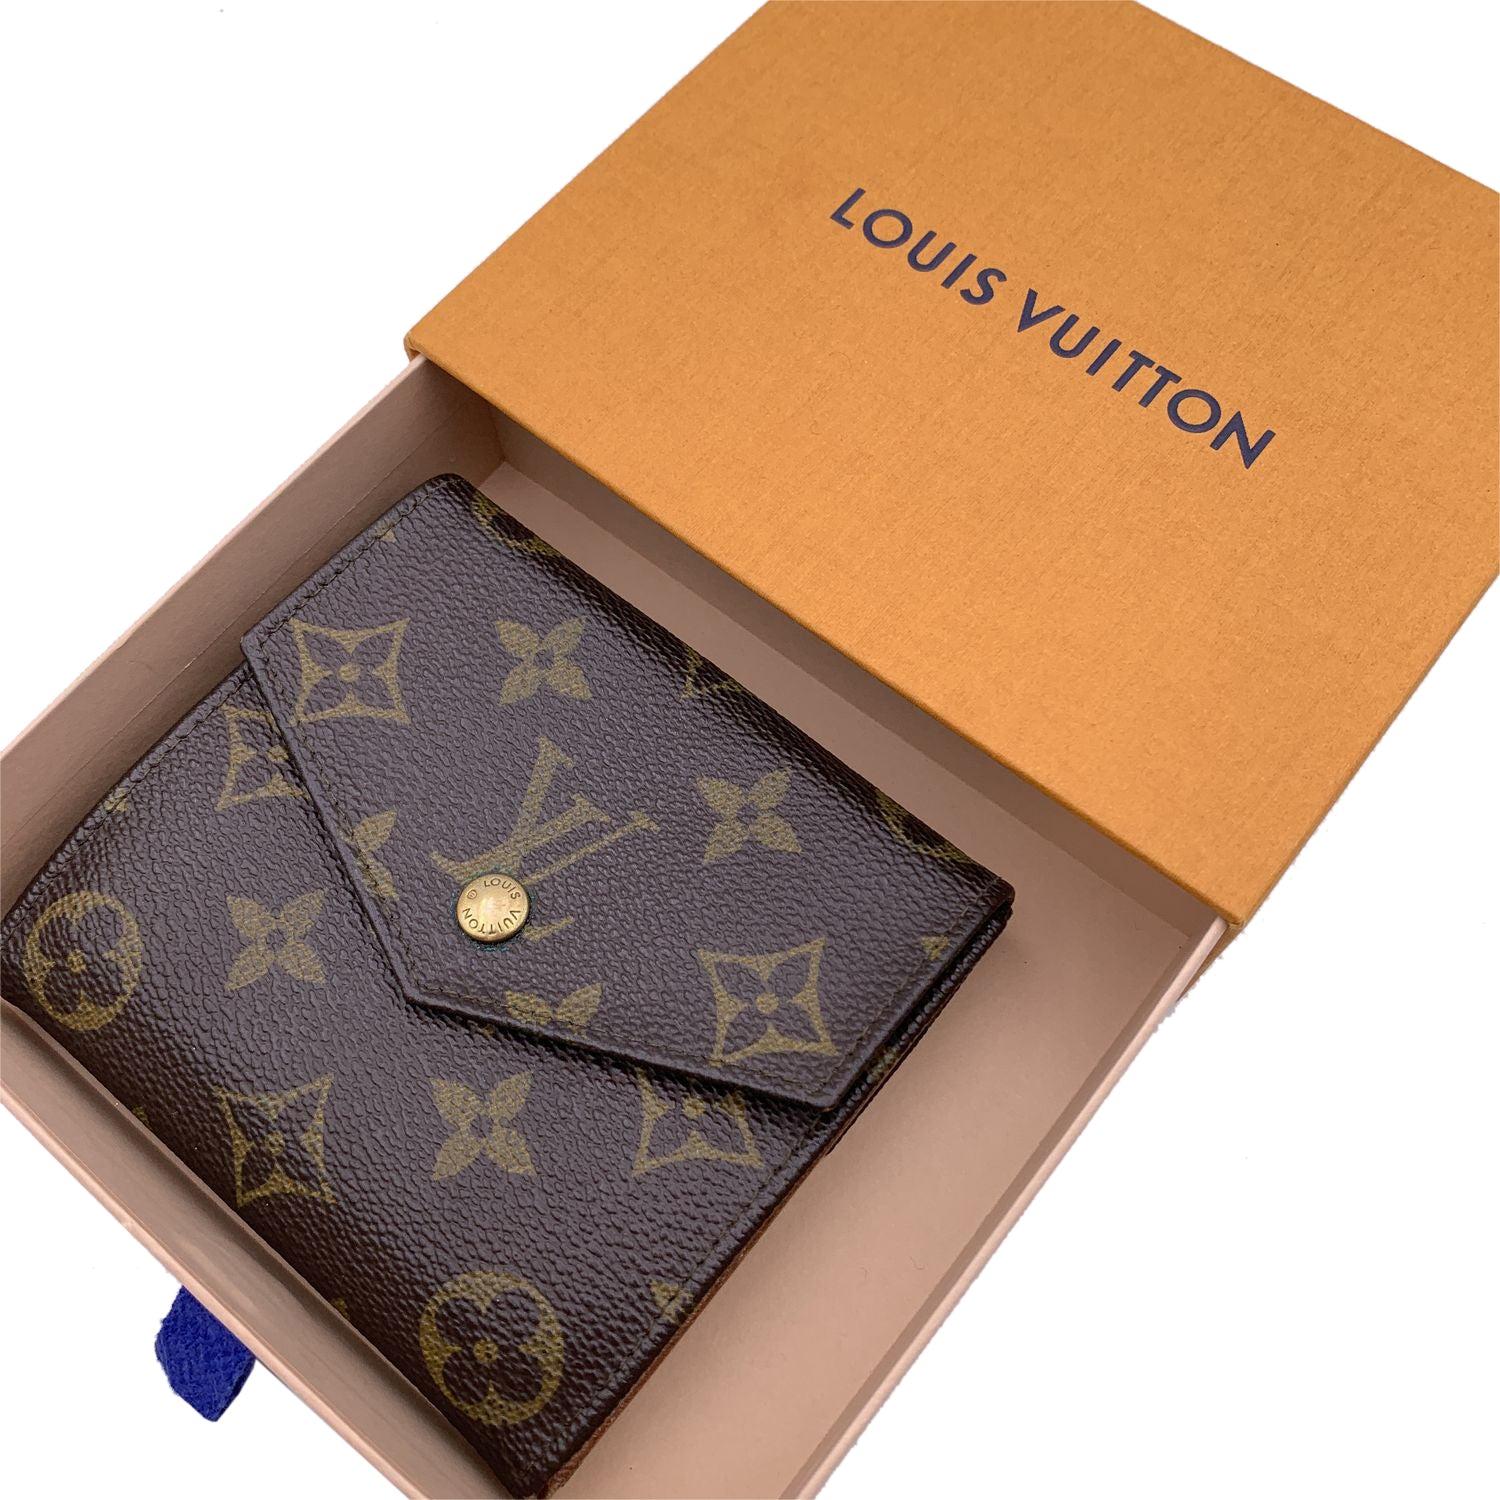 Louis Vuitton Vintage square-shaped wallet with double side flap. Crafted in brown monogram canvas. Leather lining. 1 flap coin compartment on a side and a trifold section on the other side, with 2 bill compartments, 4 credit card slots and 2 open